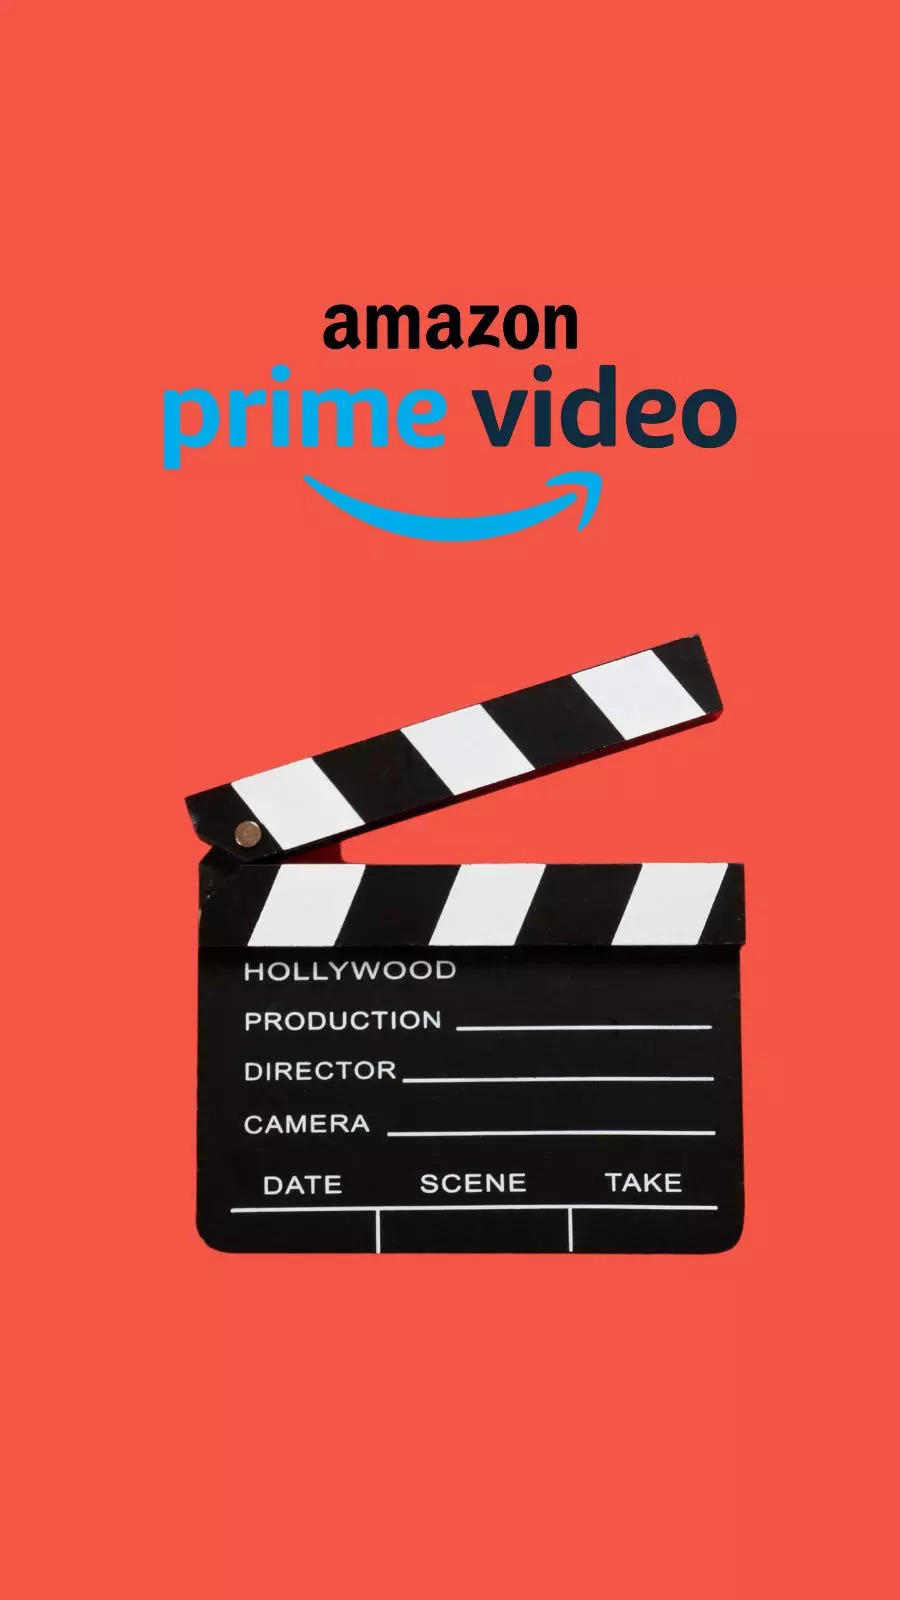 Amazon Prime Video Movies Top 7 Movies To Watch On Amazon Prime Video In January 2023 EconomicTimes